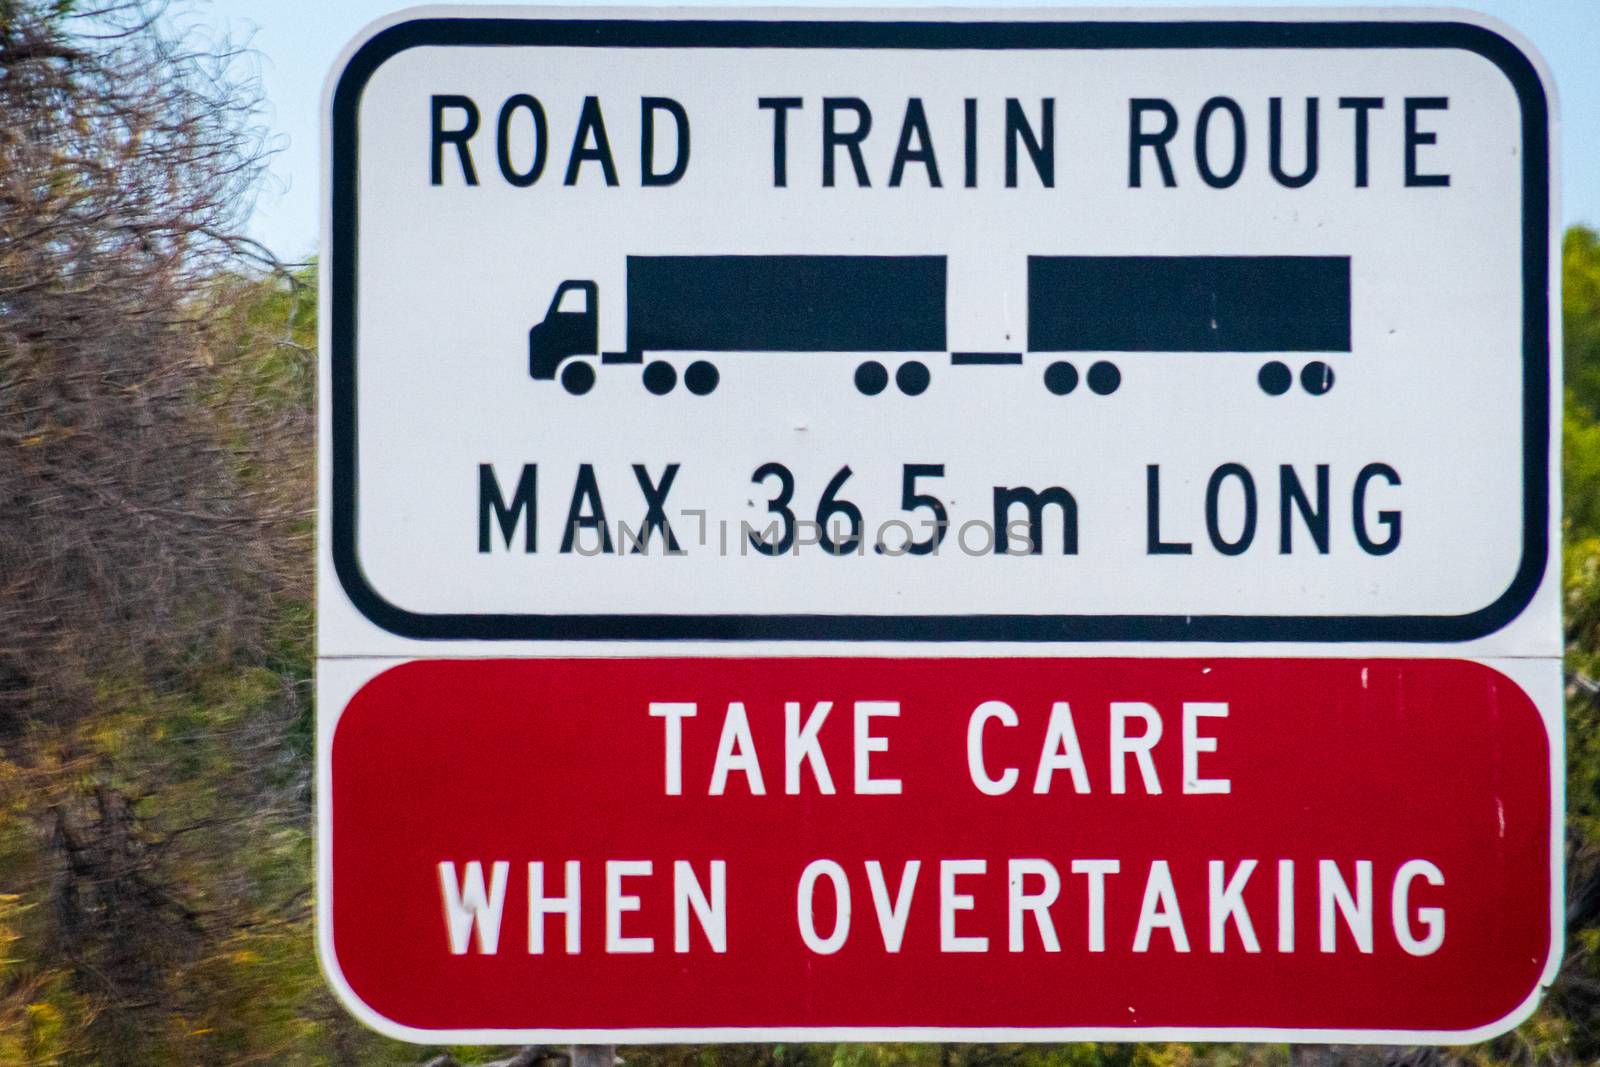 Road Train Route max length 36,5 meters Take Care When Overtaking street sign in Australia by MXW_Stock